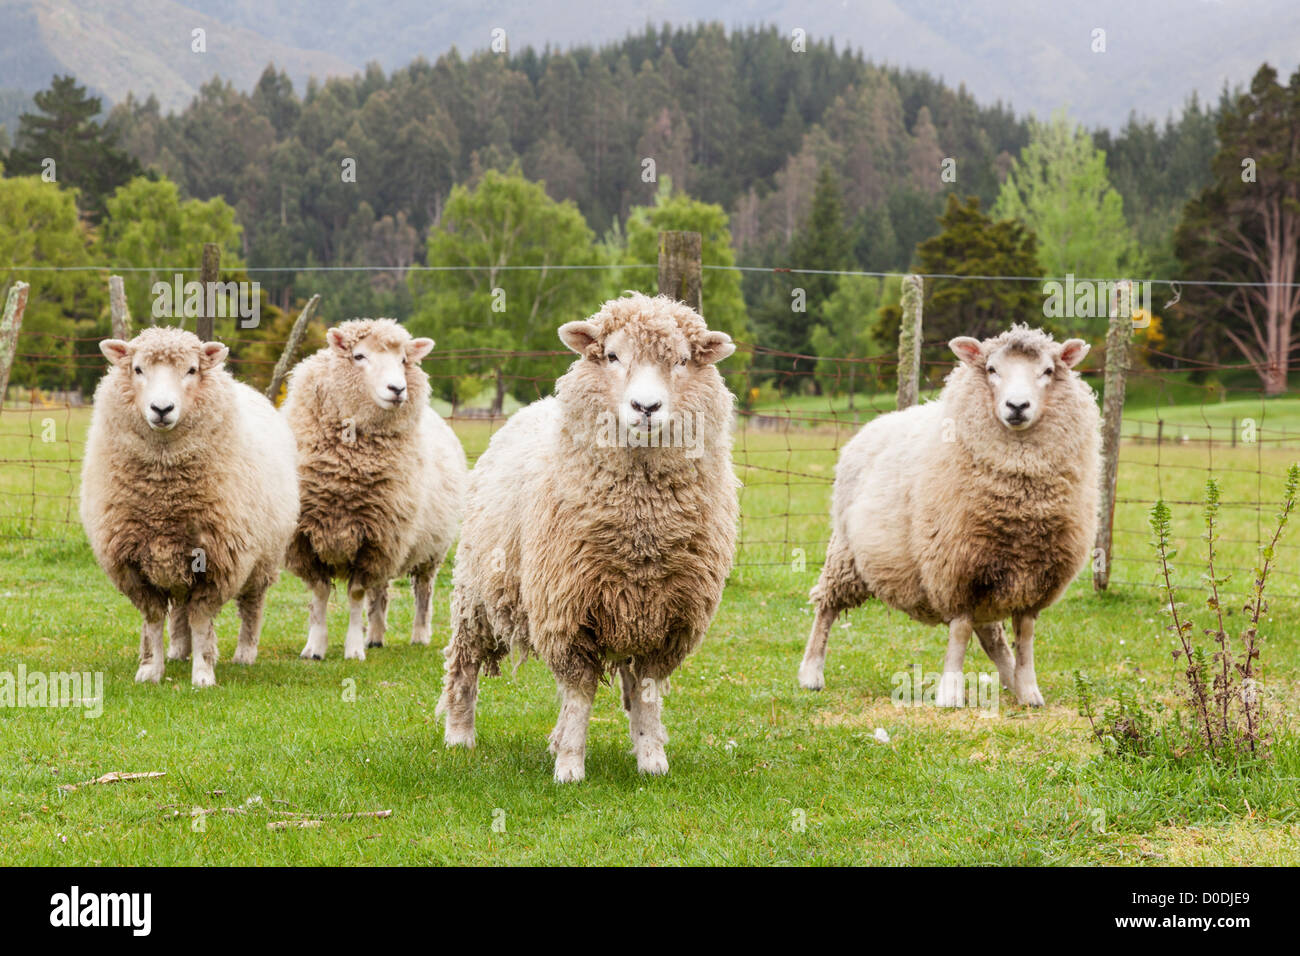 Four mixed breed New Zealand sheep in a paddock or field. Stock Photo